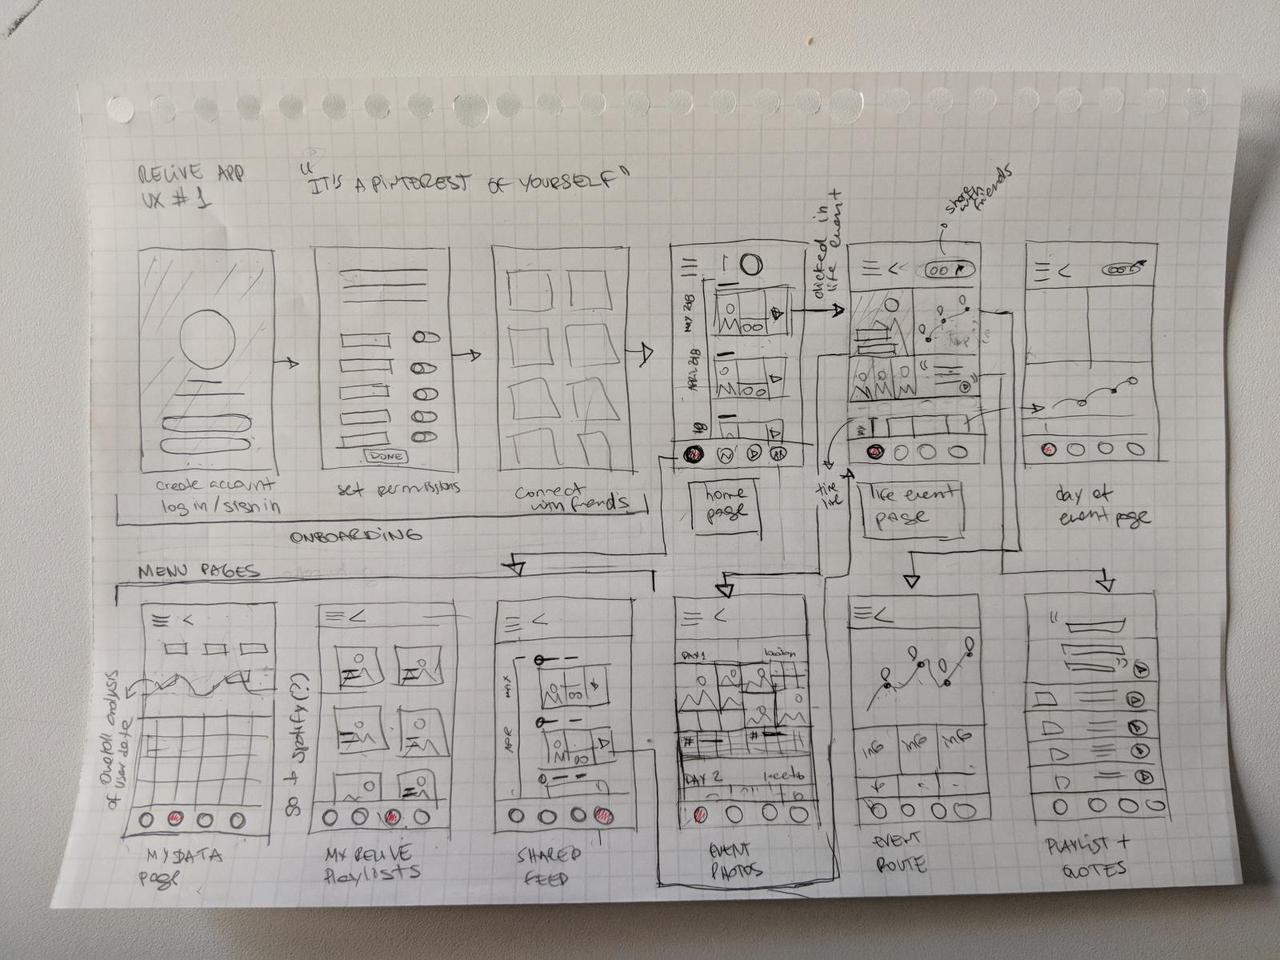 drawing of 2 rows and 6 columns of potential screens for app on phone. screens that are connected through user interaction are connected with arrows to indicate user flow from one screen to another.